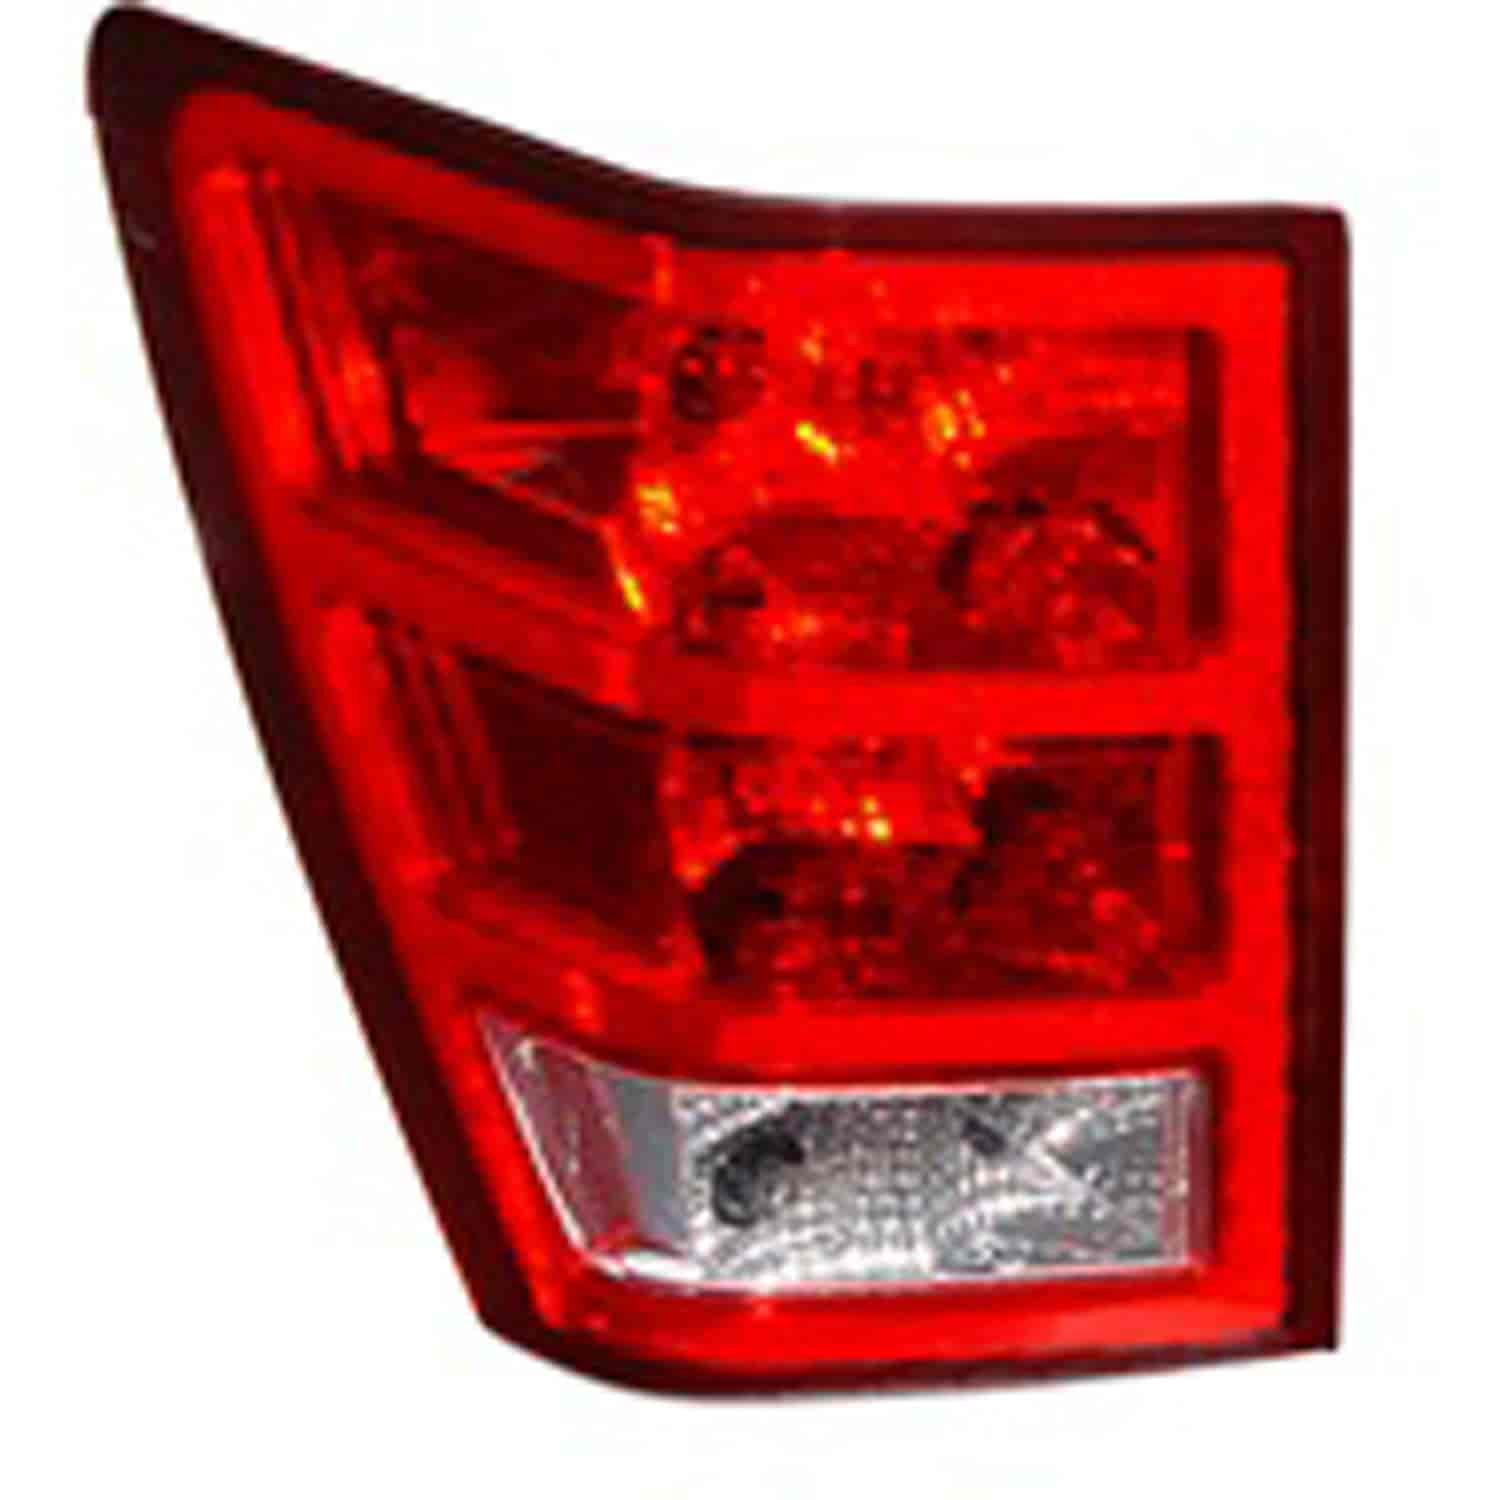 Replacement tail light assembly from Omix-ADA, Fits left side of 07-10 Jeep Grand Cherokee WK